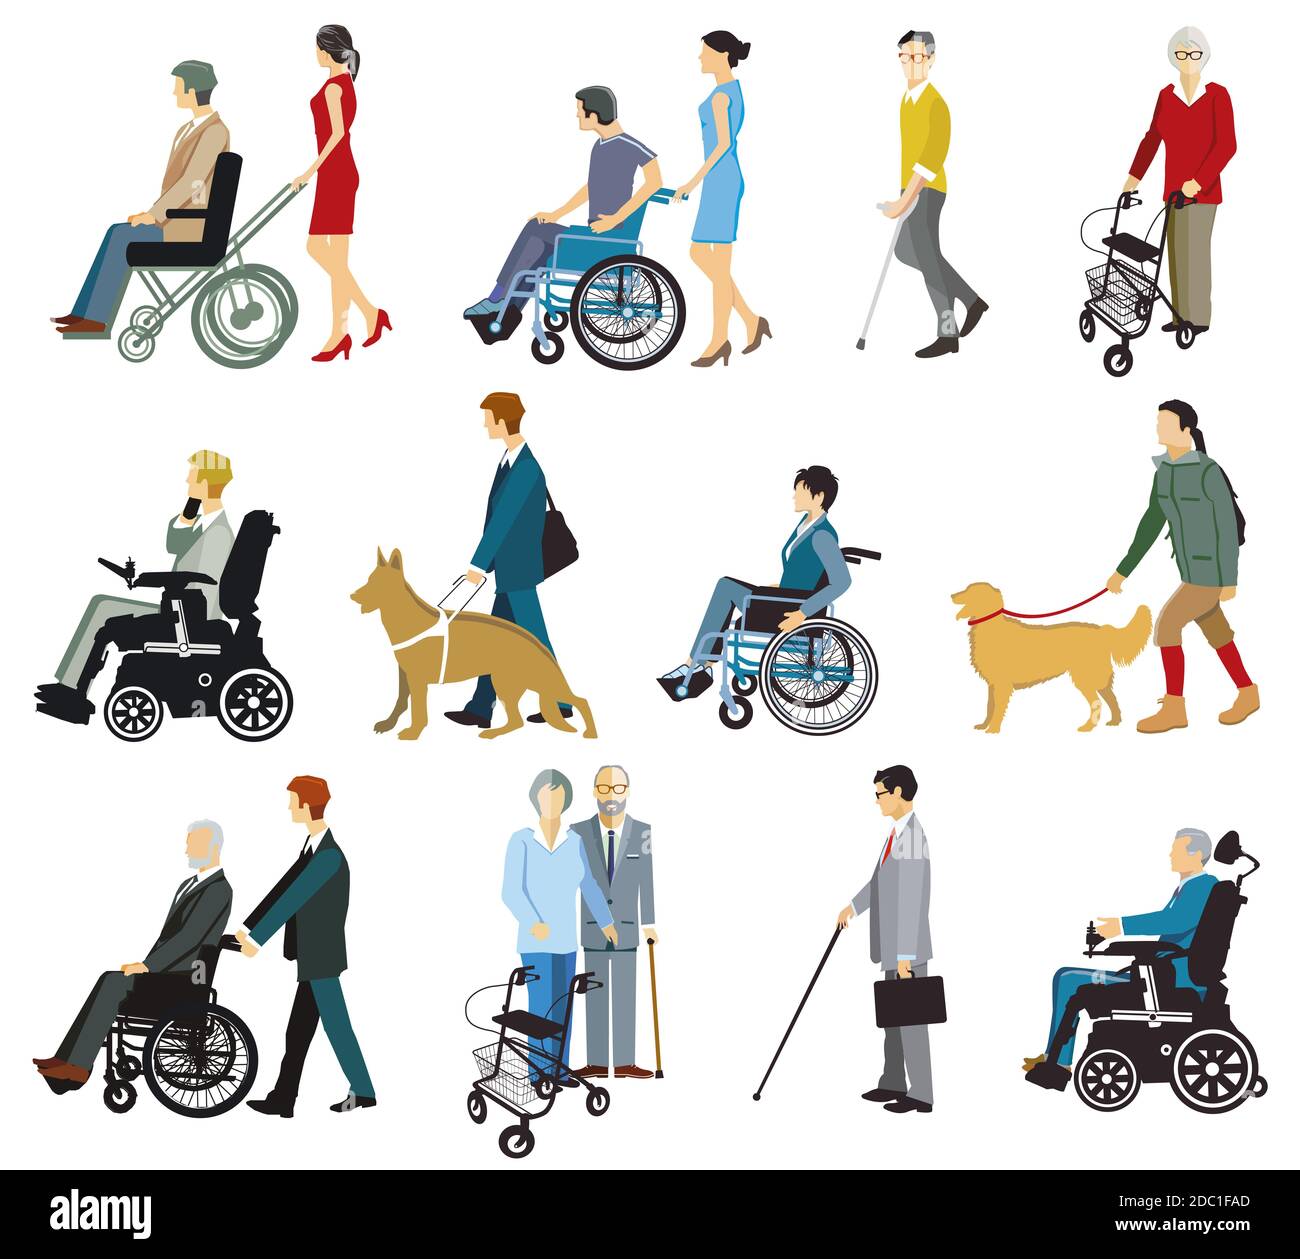 Group of people with disabilities and walking aids, isolated Stock Photo